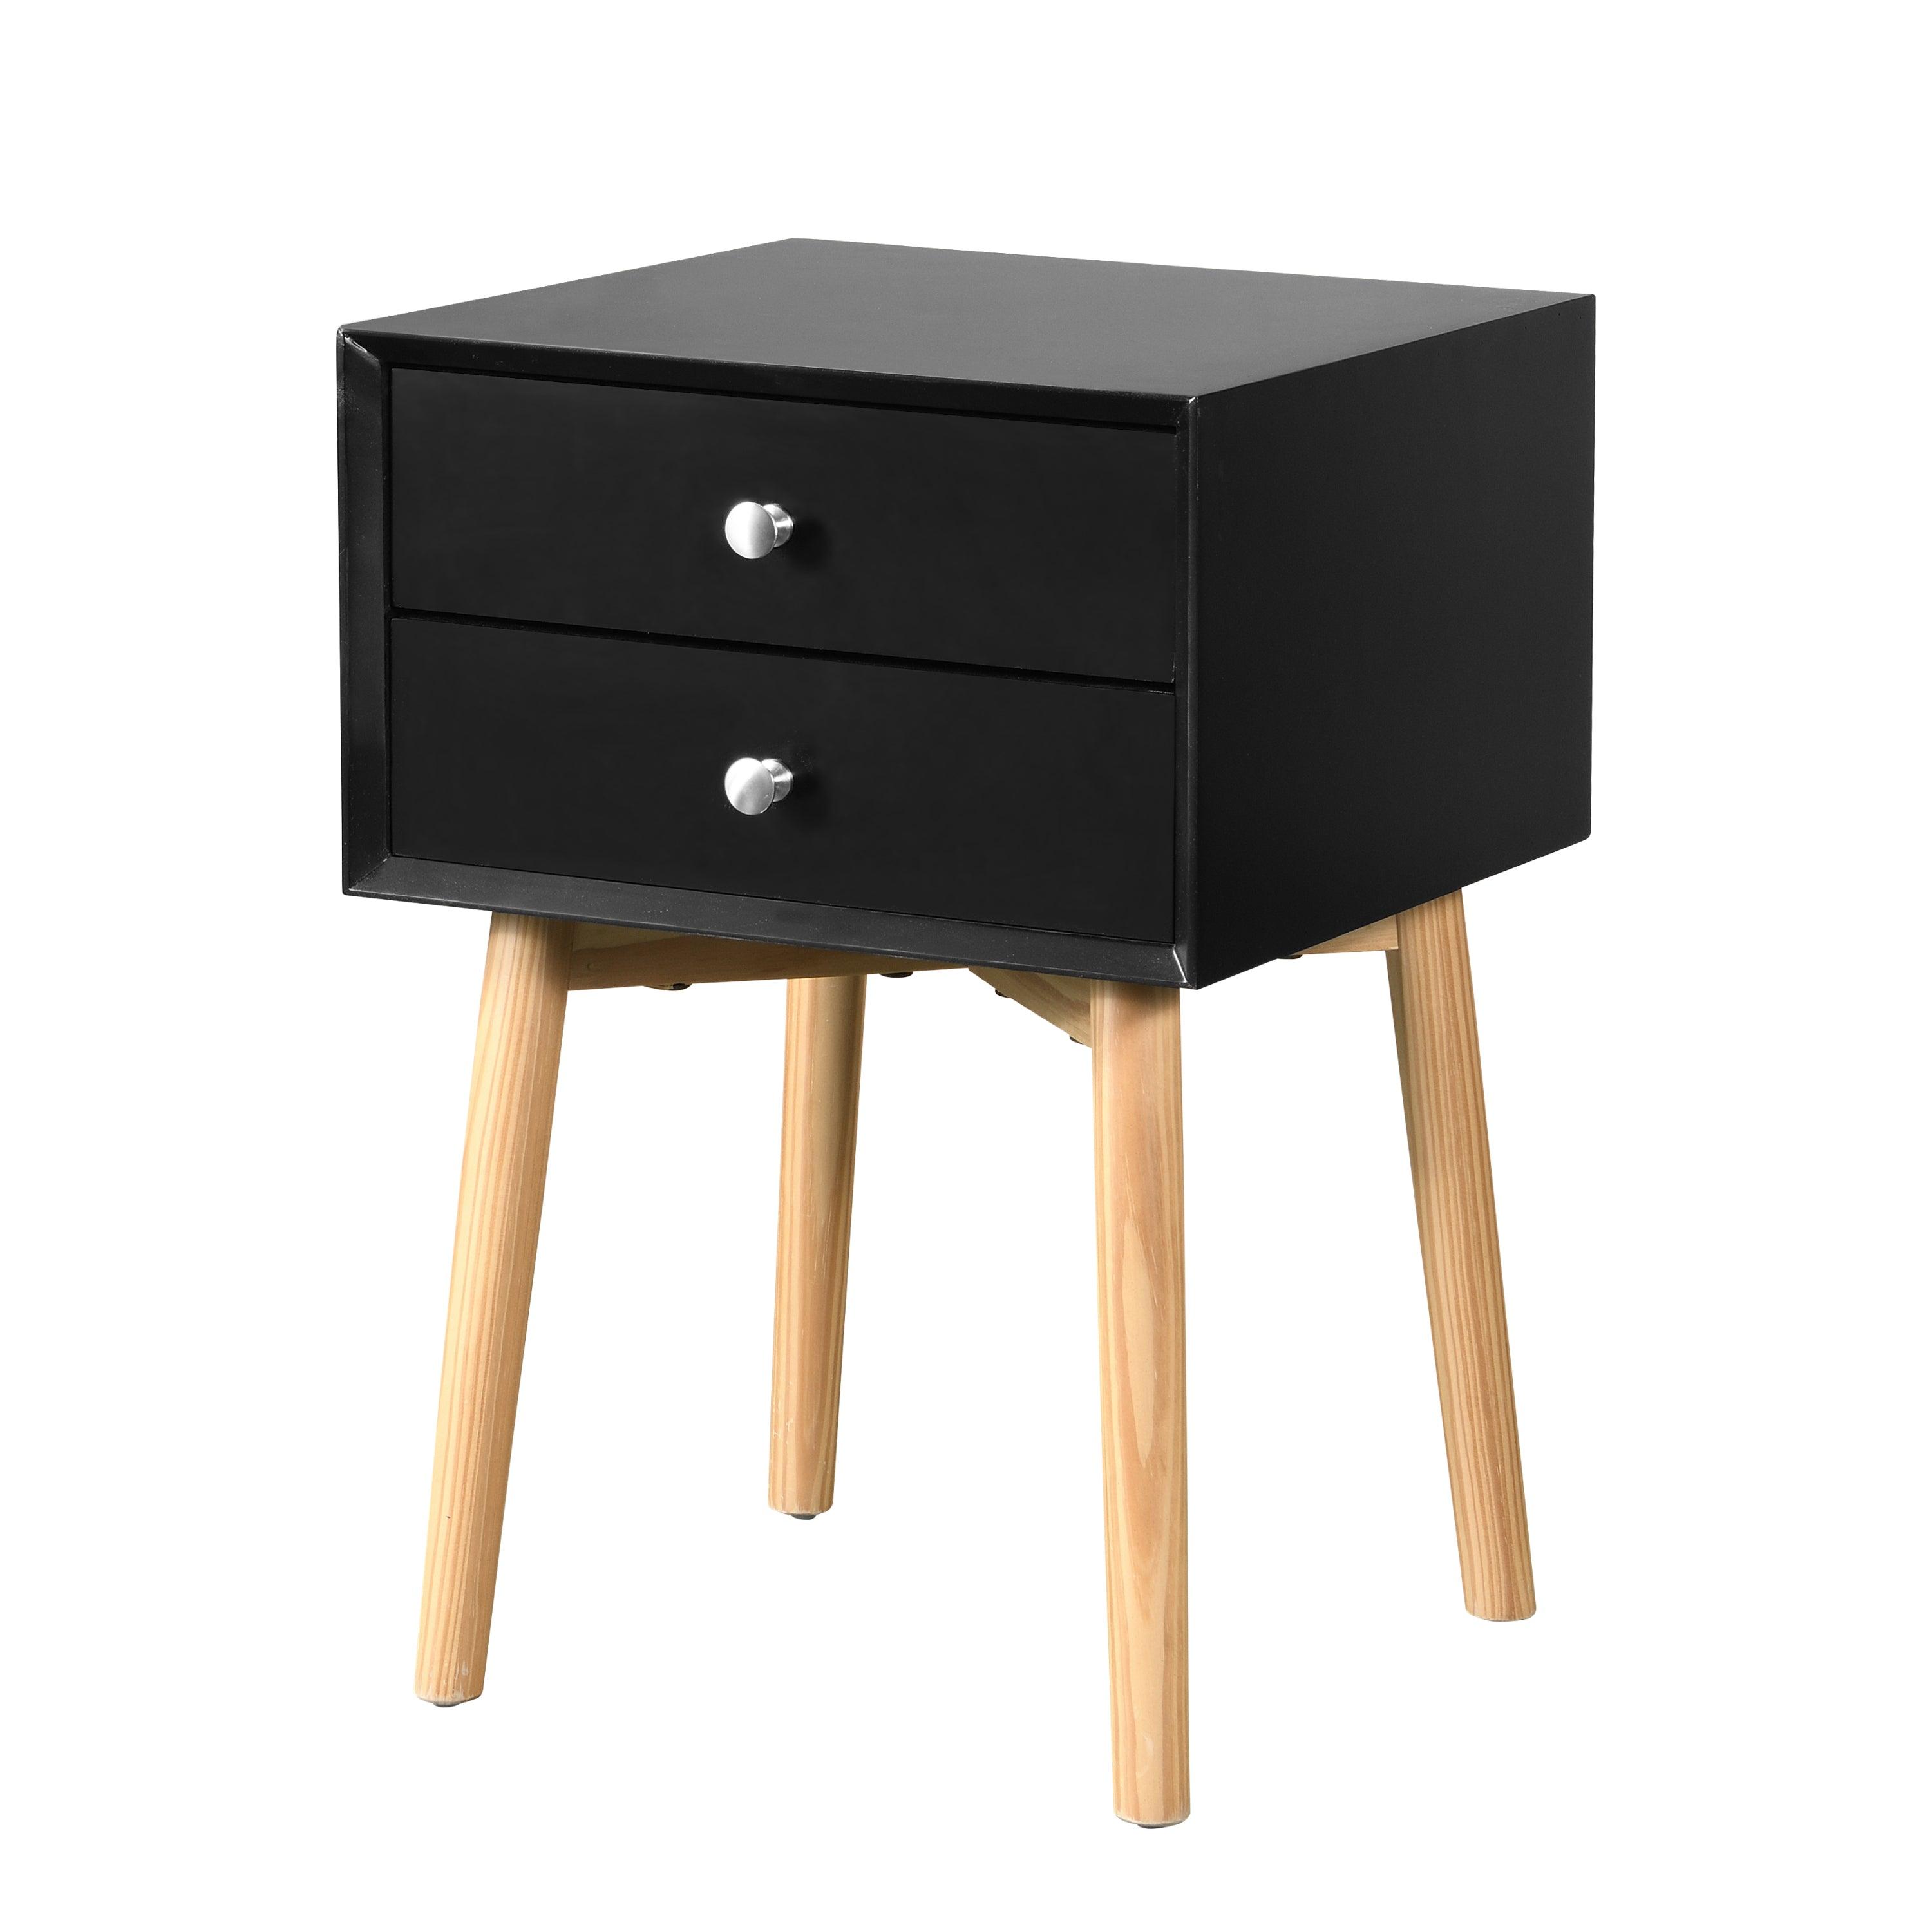 🆓🚛 Side Table, Bedside Table With 2 Drawers & Rubber Wood Legs, Mid-Century Modern Storage Cabinet for Bedroom Living Room, Black